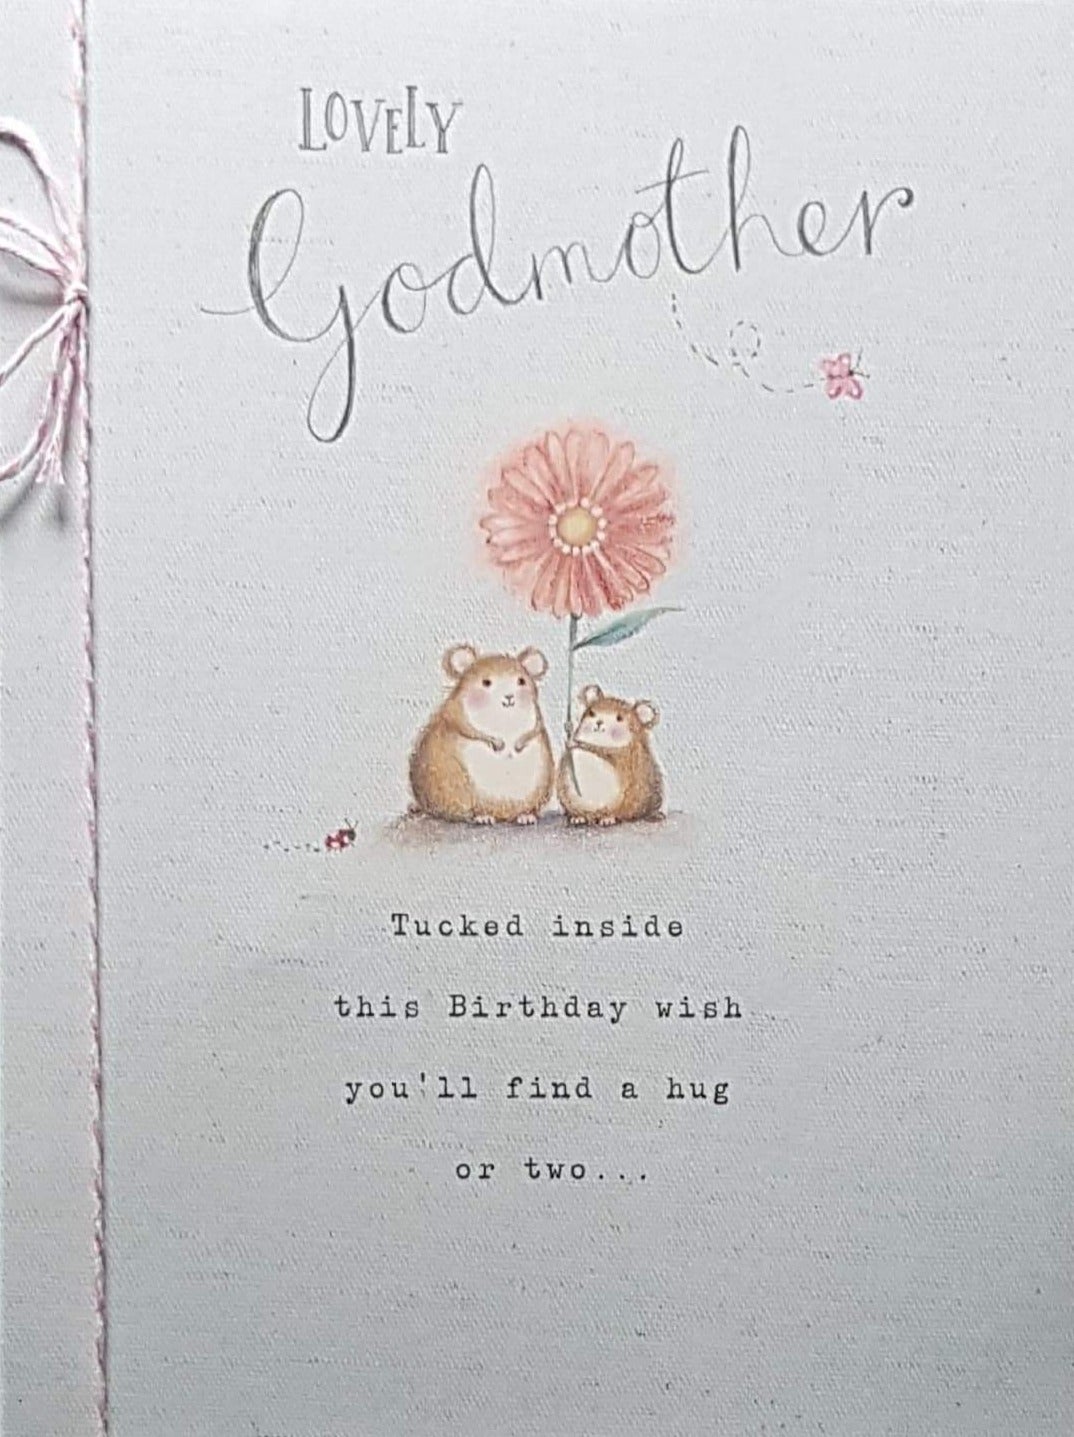 Birthday Card - Godmother / 'Tucked Inside' & Two Mice